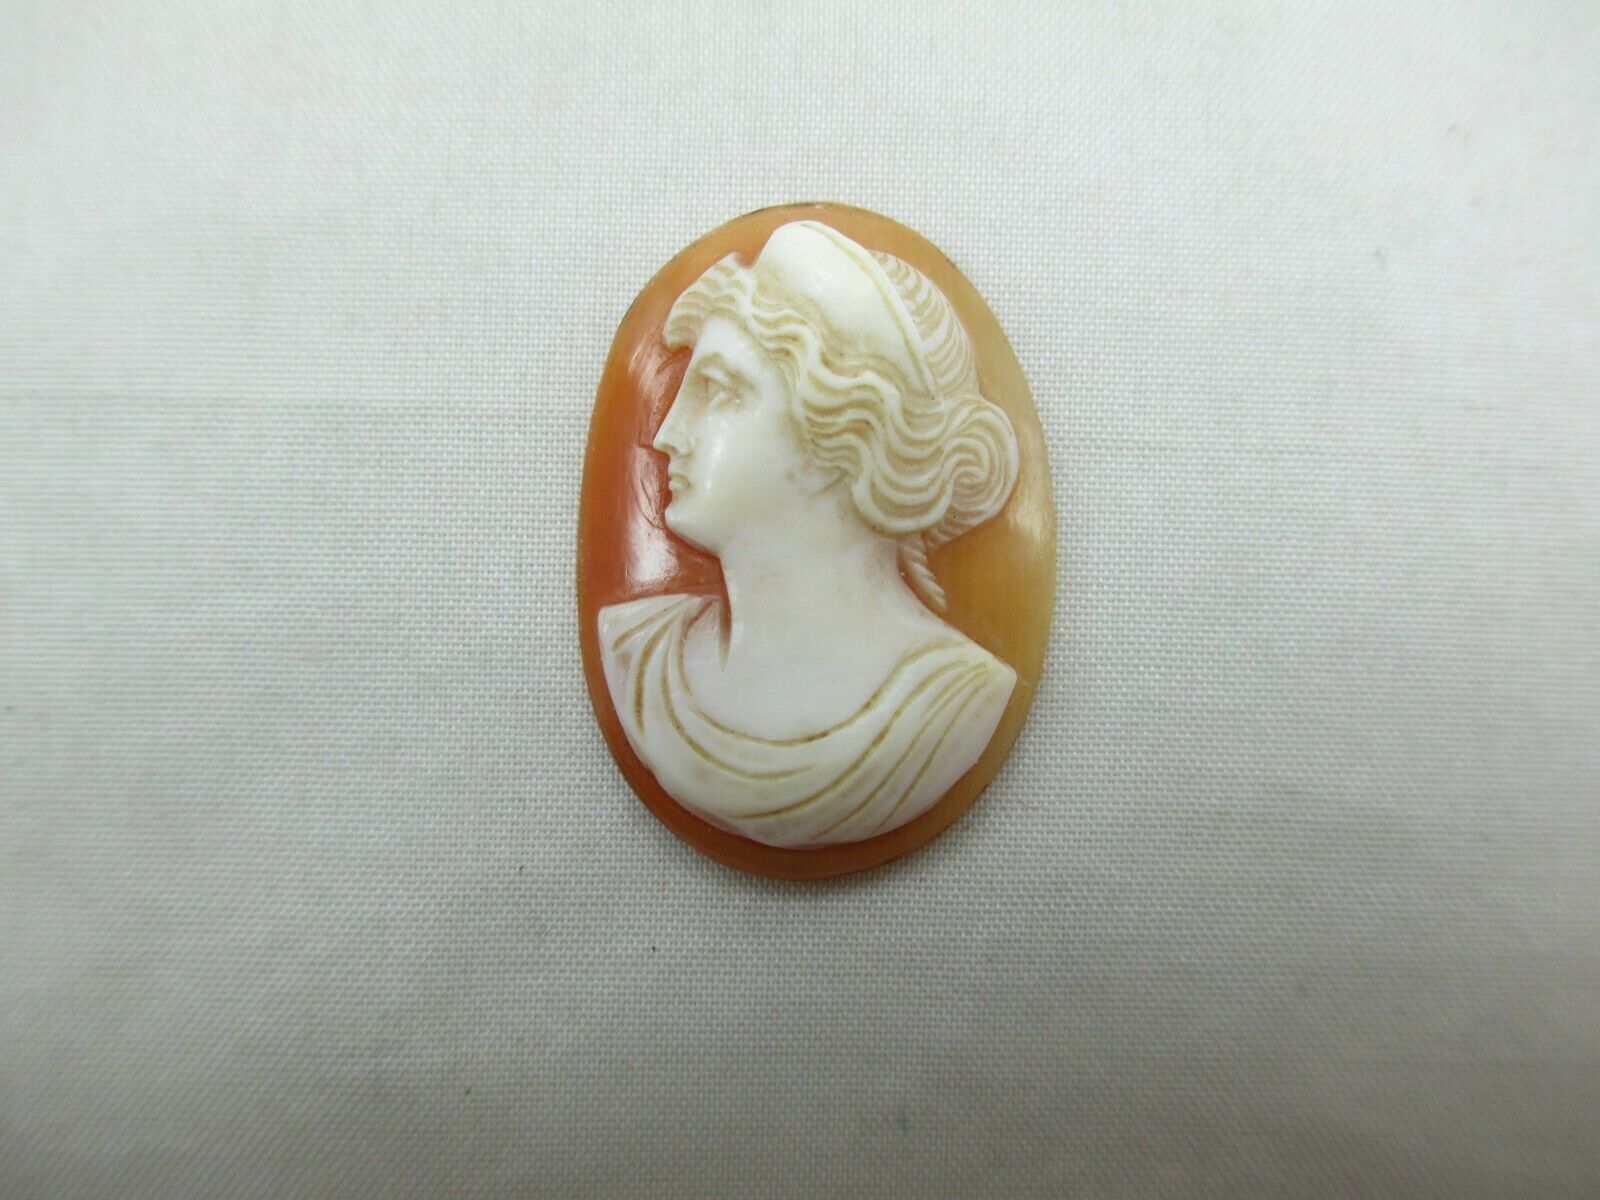 Vintage Antique Loose Carved Shell Cameo Convex Facing Left 30mm X 21.9mm 501e